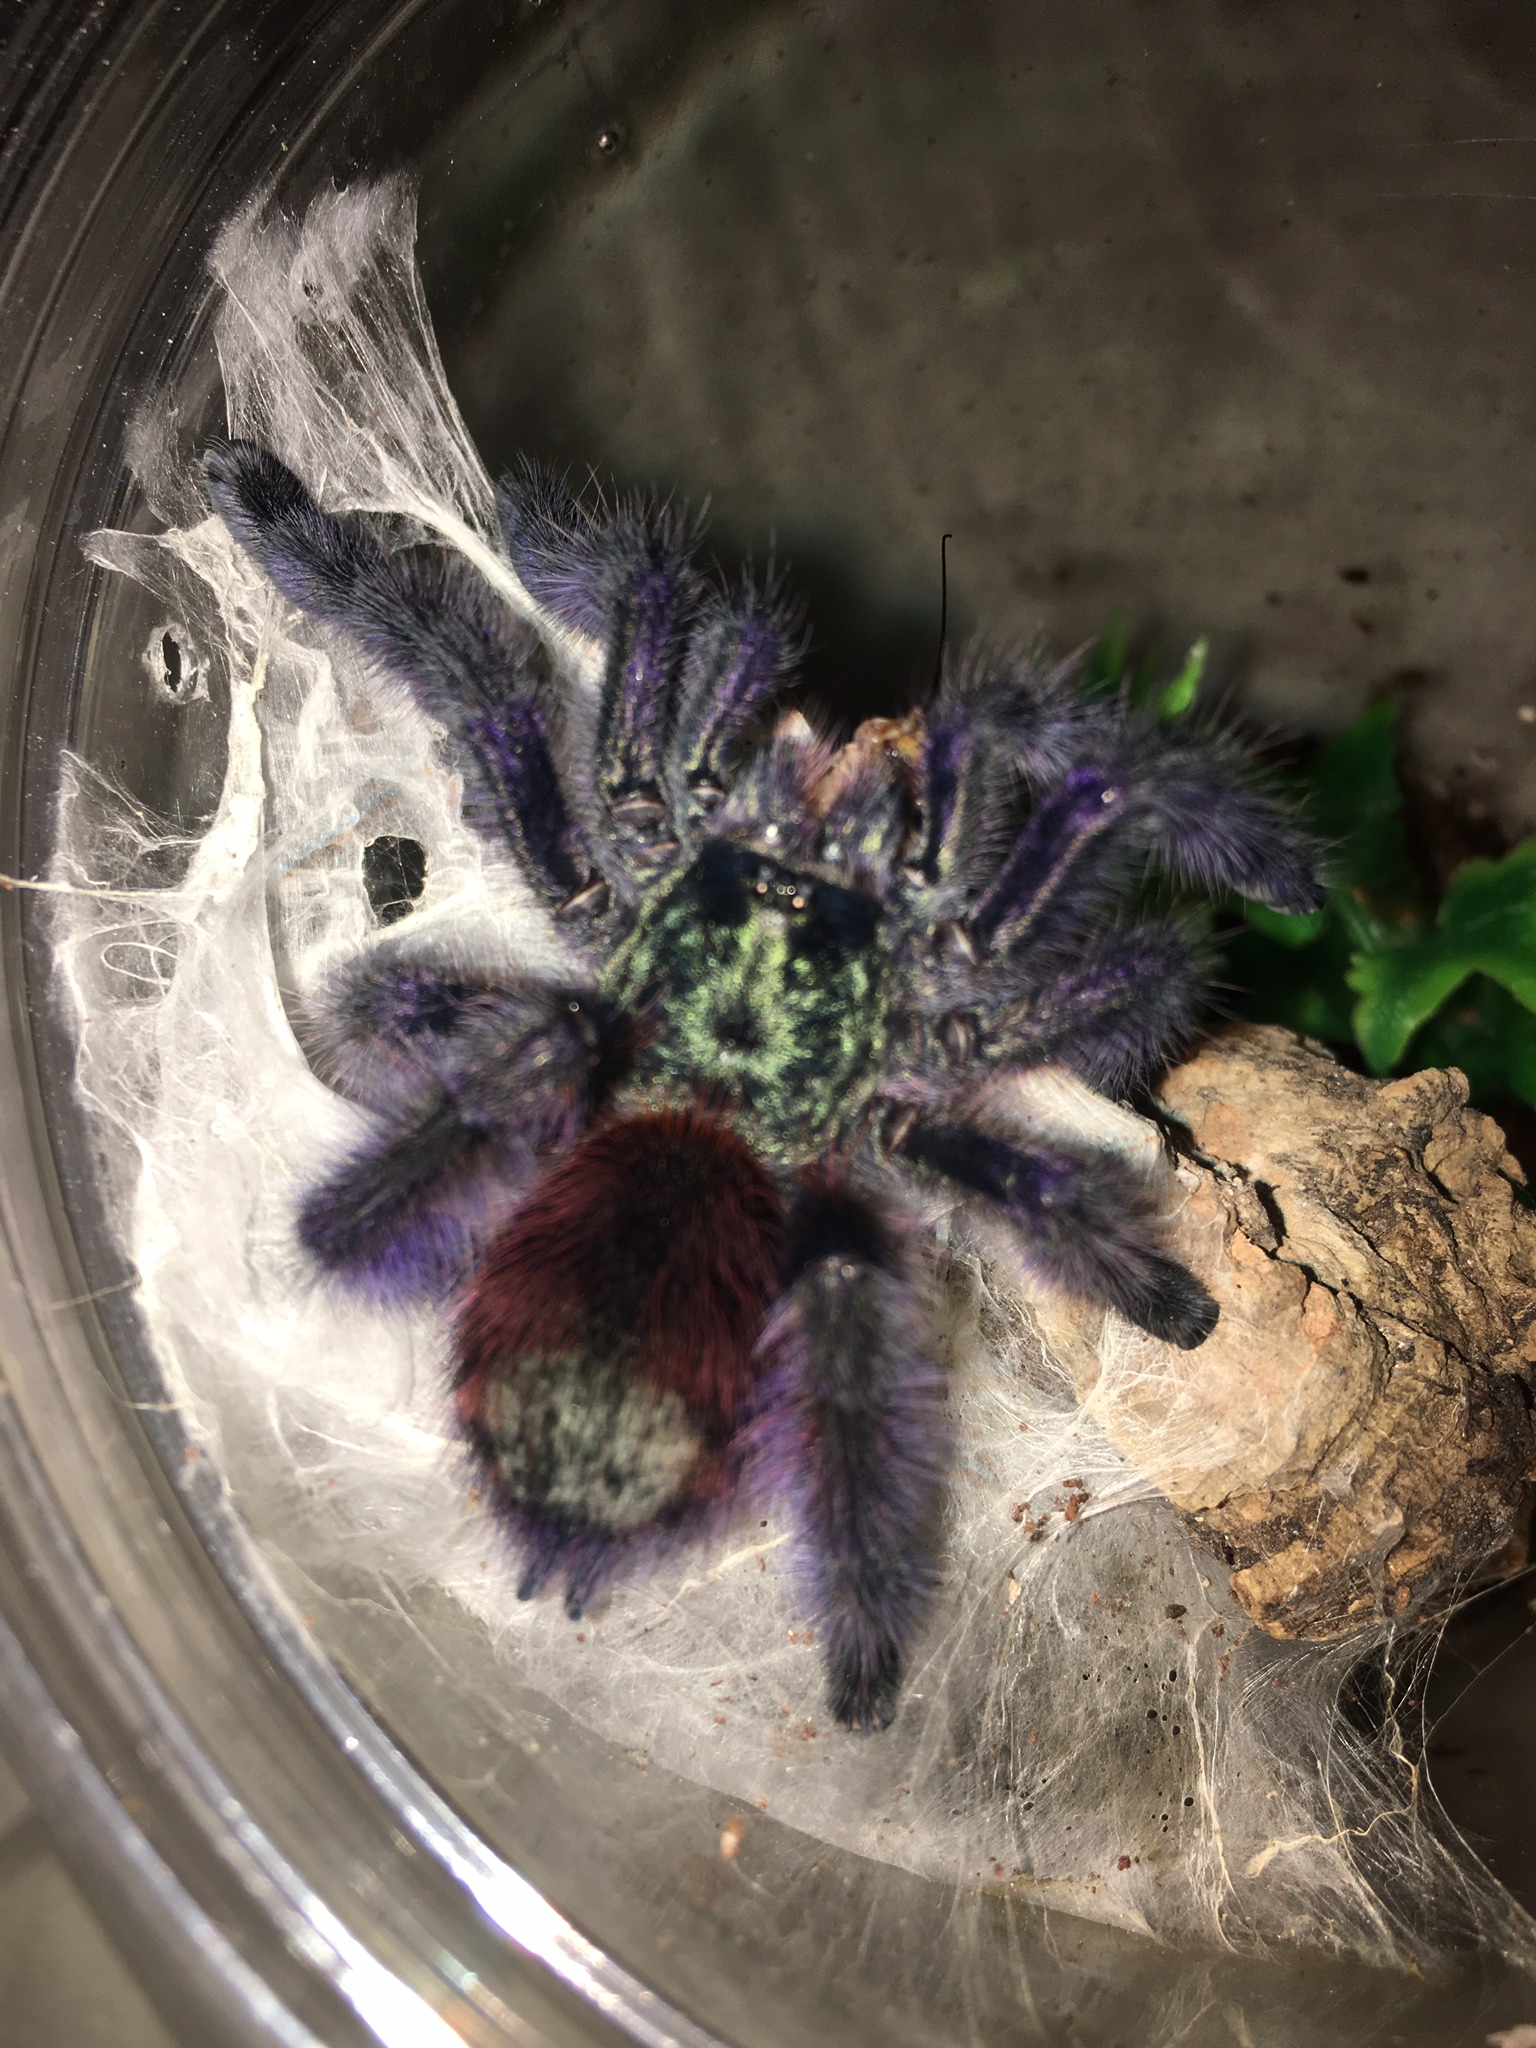 C Versi recently molted